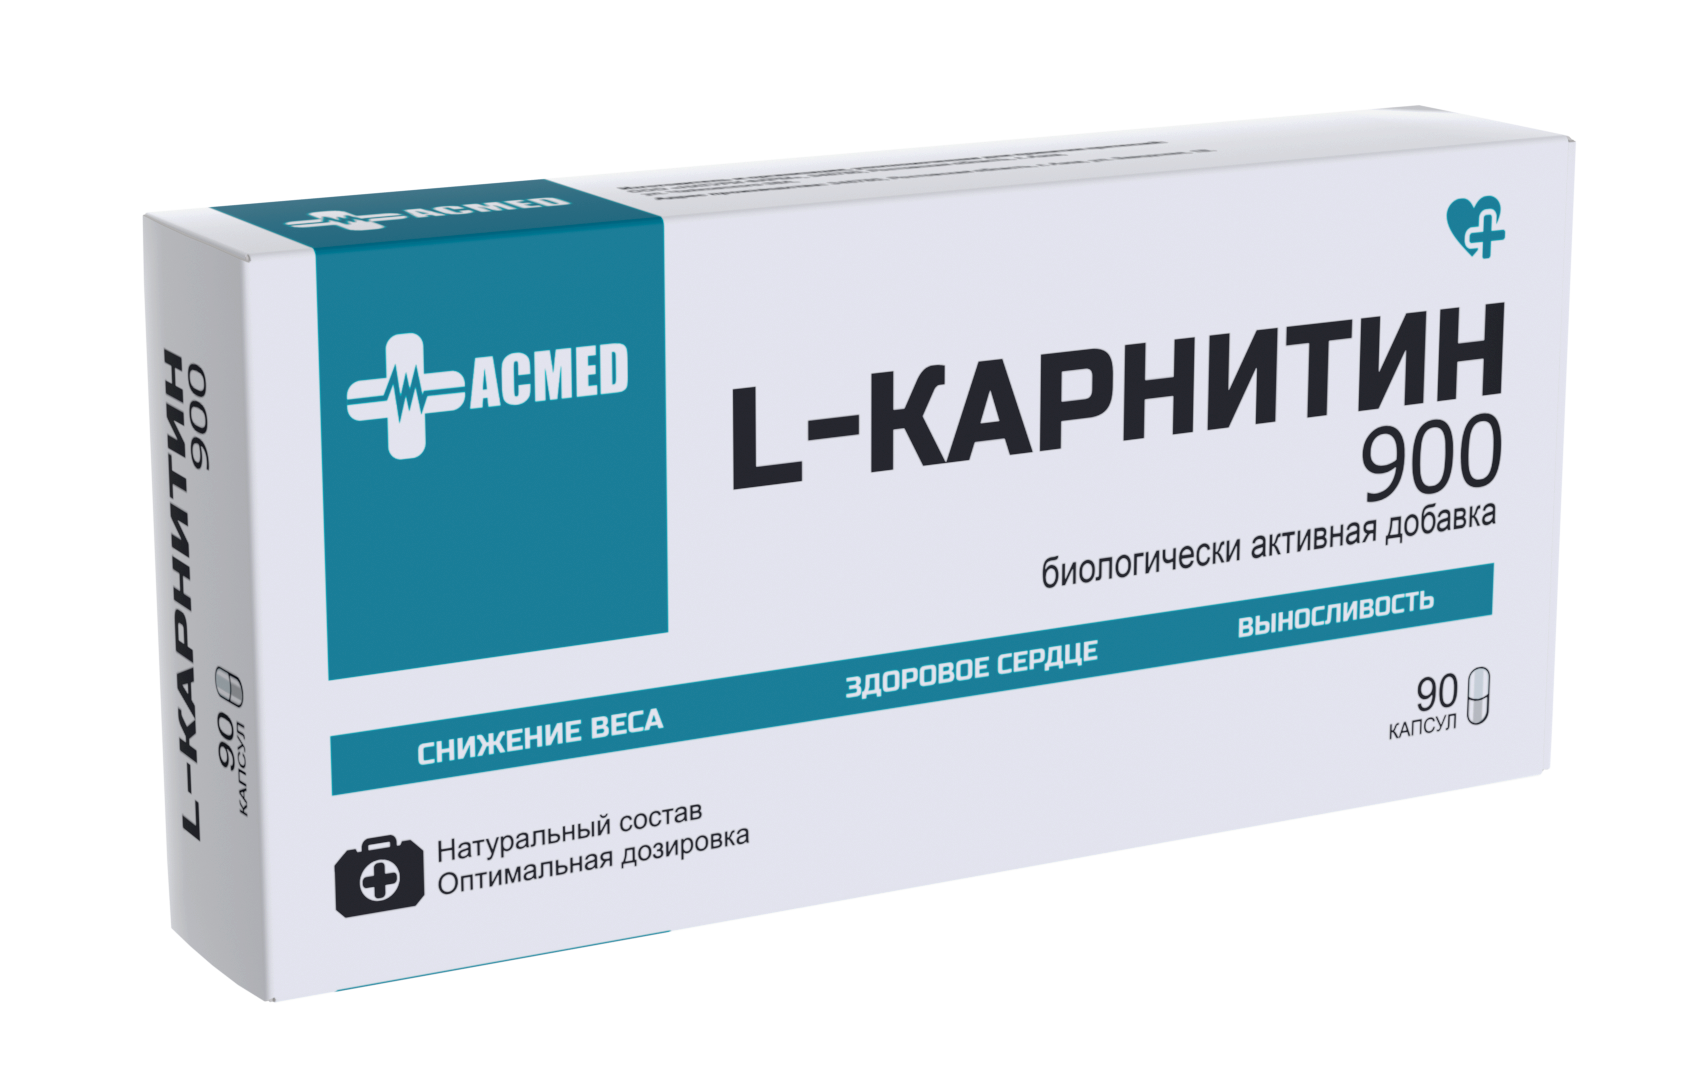 L-карнитин ACMED капсулы 900 мг 90 шт.